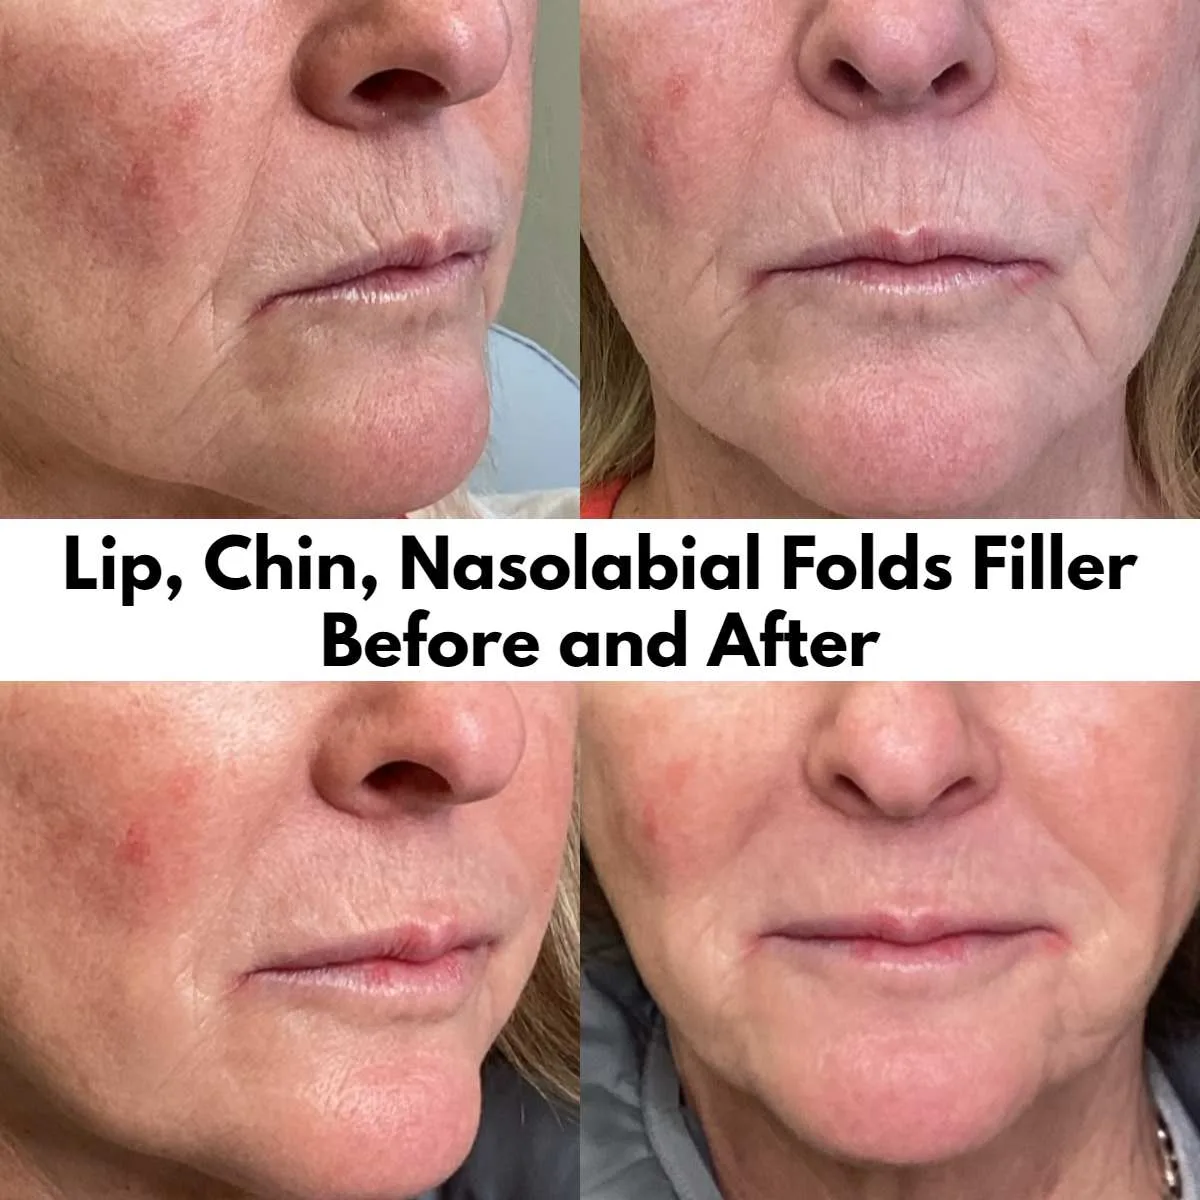 Lip, Chin, Nasolabial Folds Filler Before and After